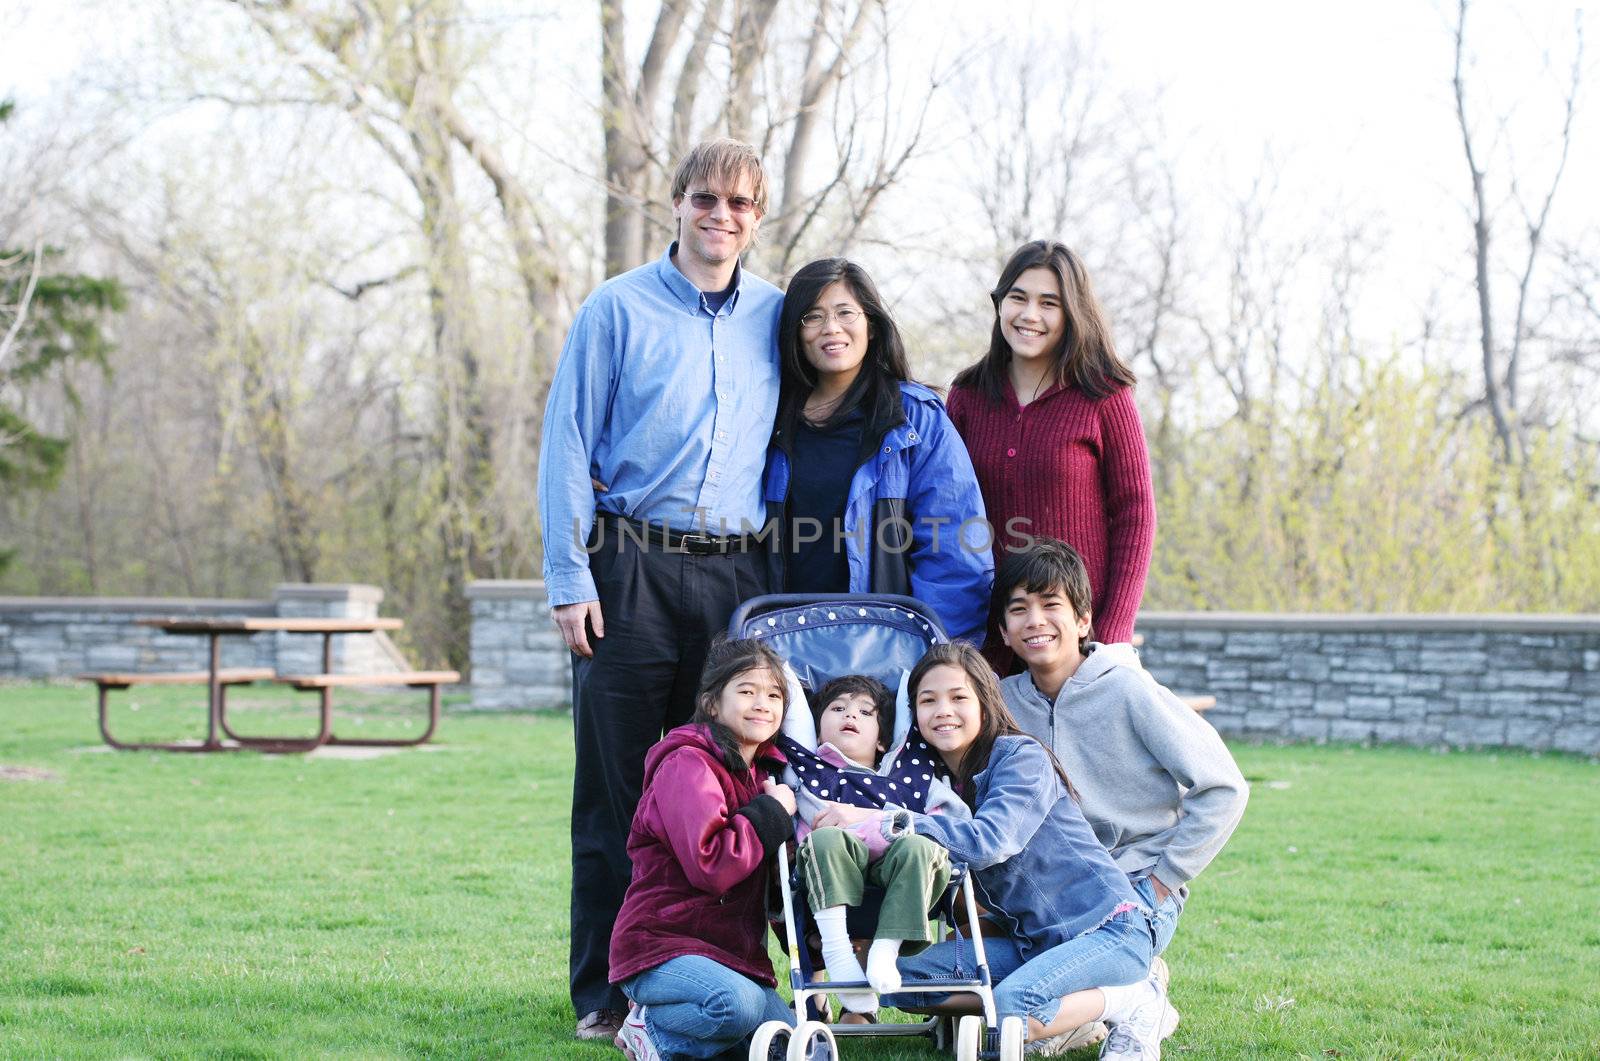 Beautiful Interracial family of seven outdoors in summer. Child in stroller is disabled with cerebral palsy